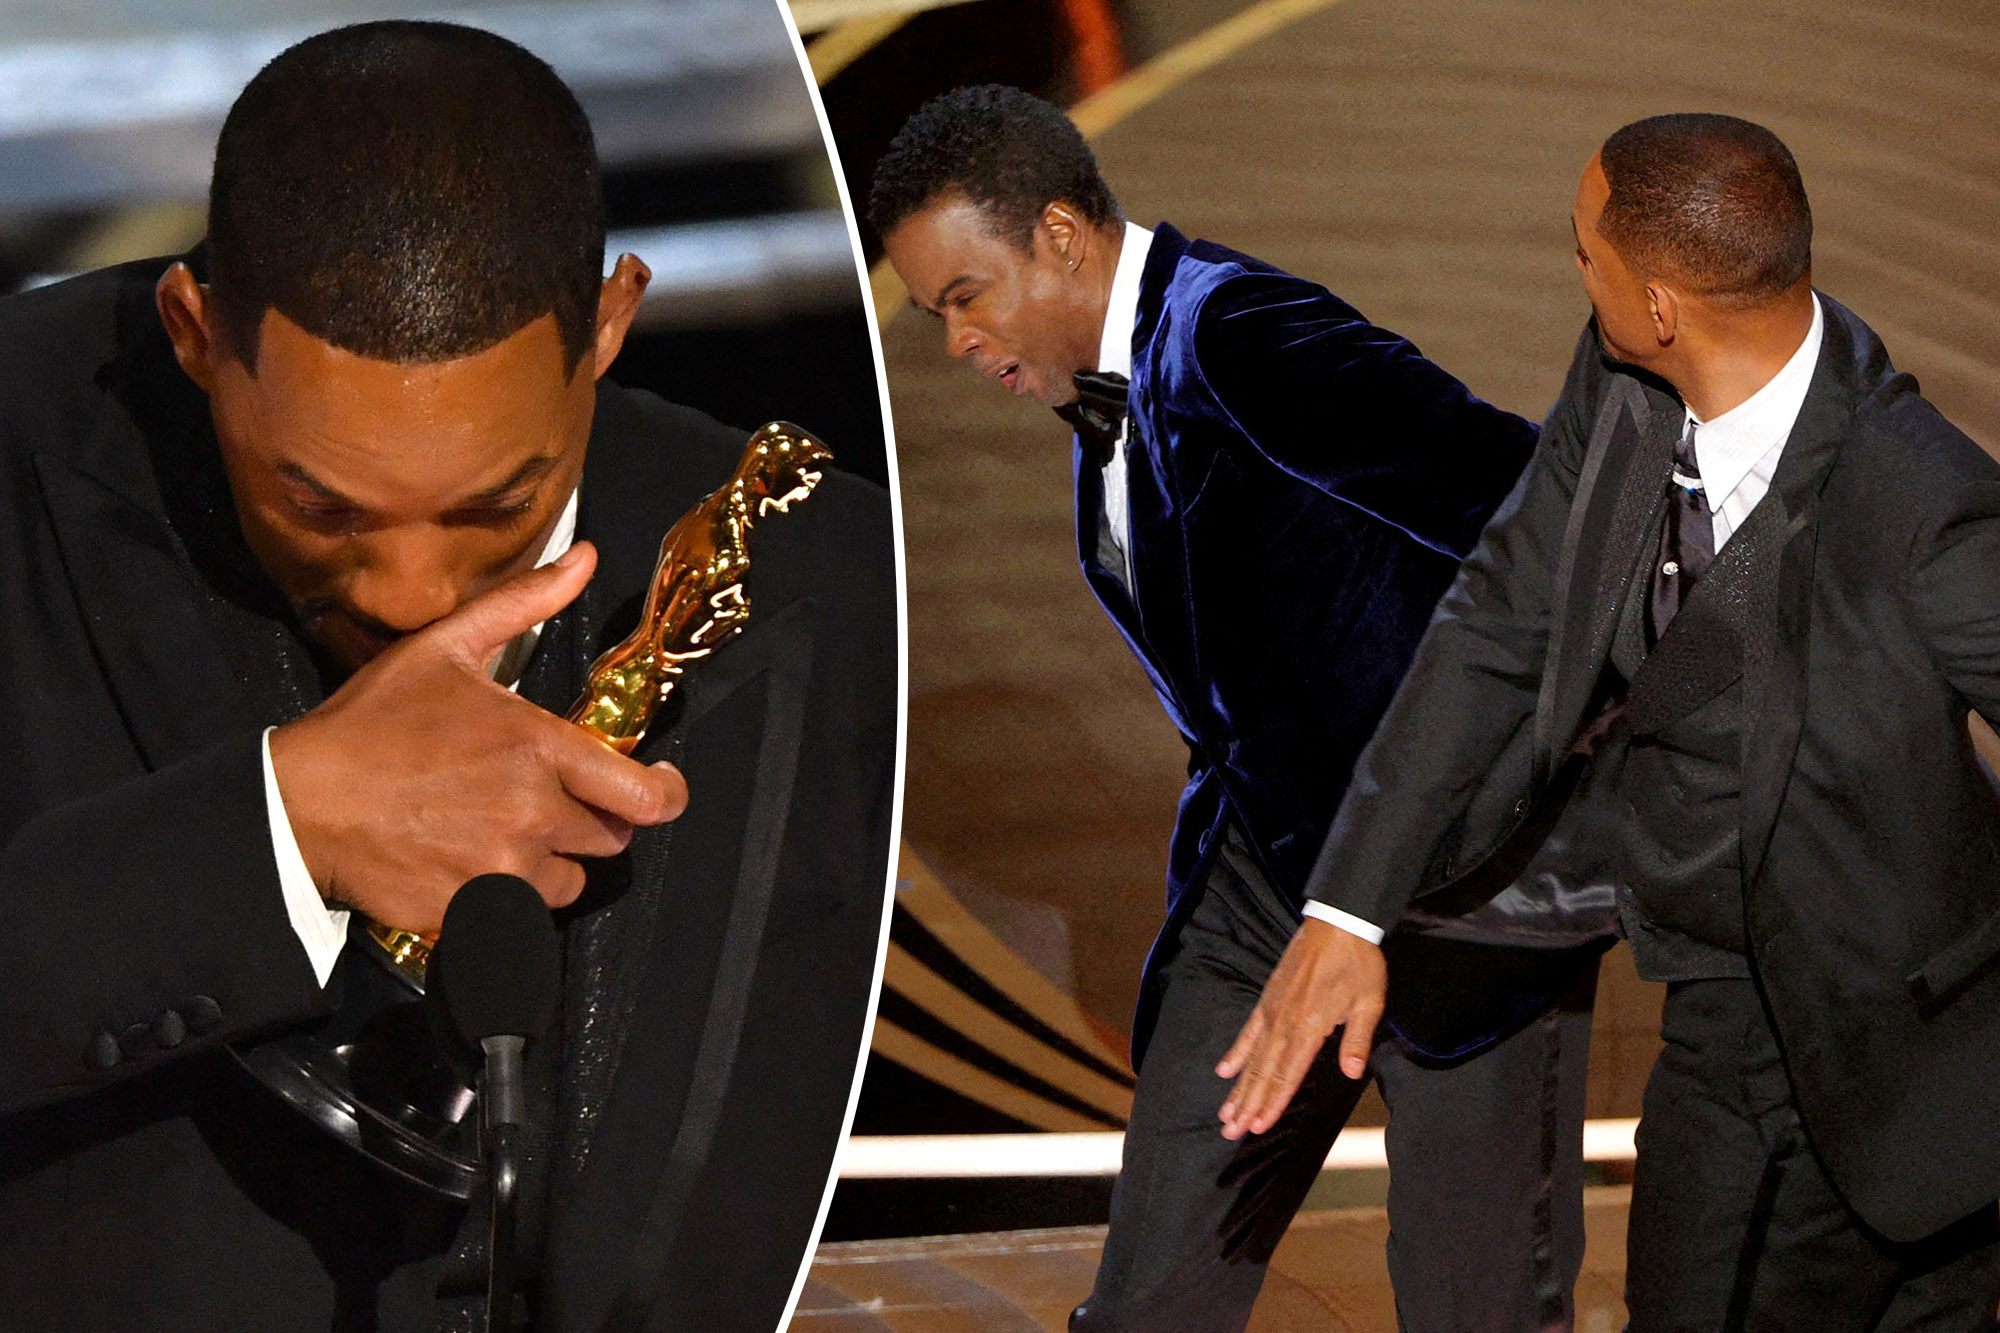 Oscars' 'punishment' for Will Smith slap is pathetic and weak